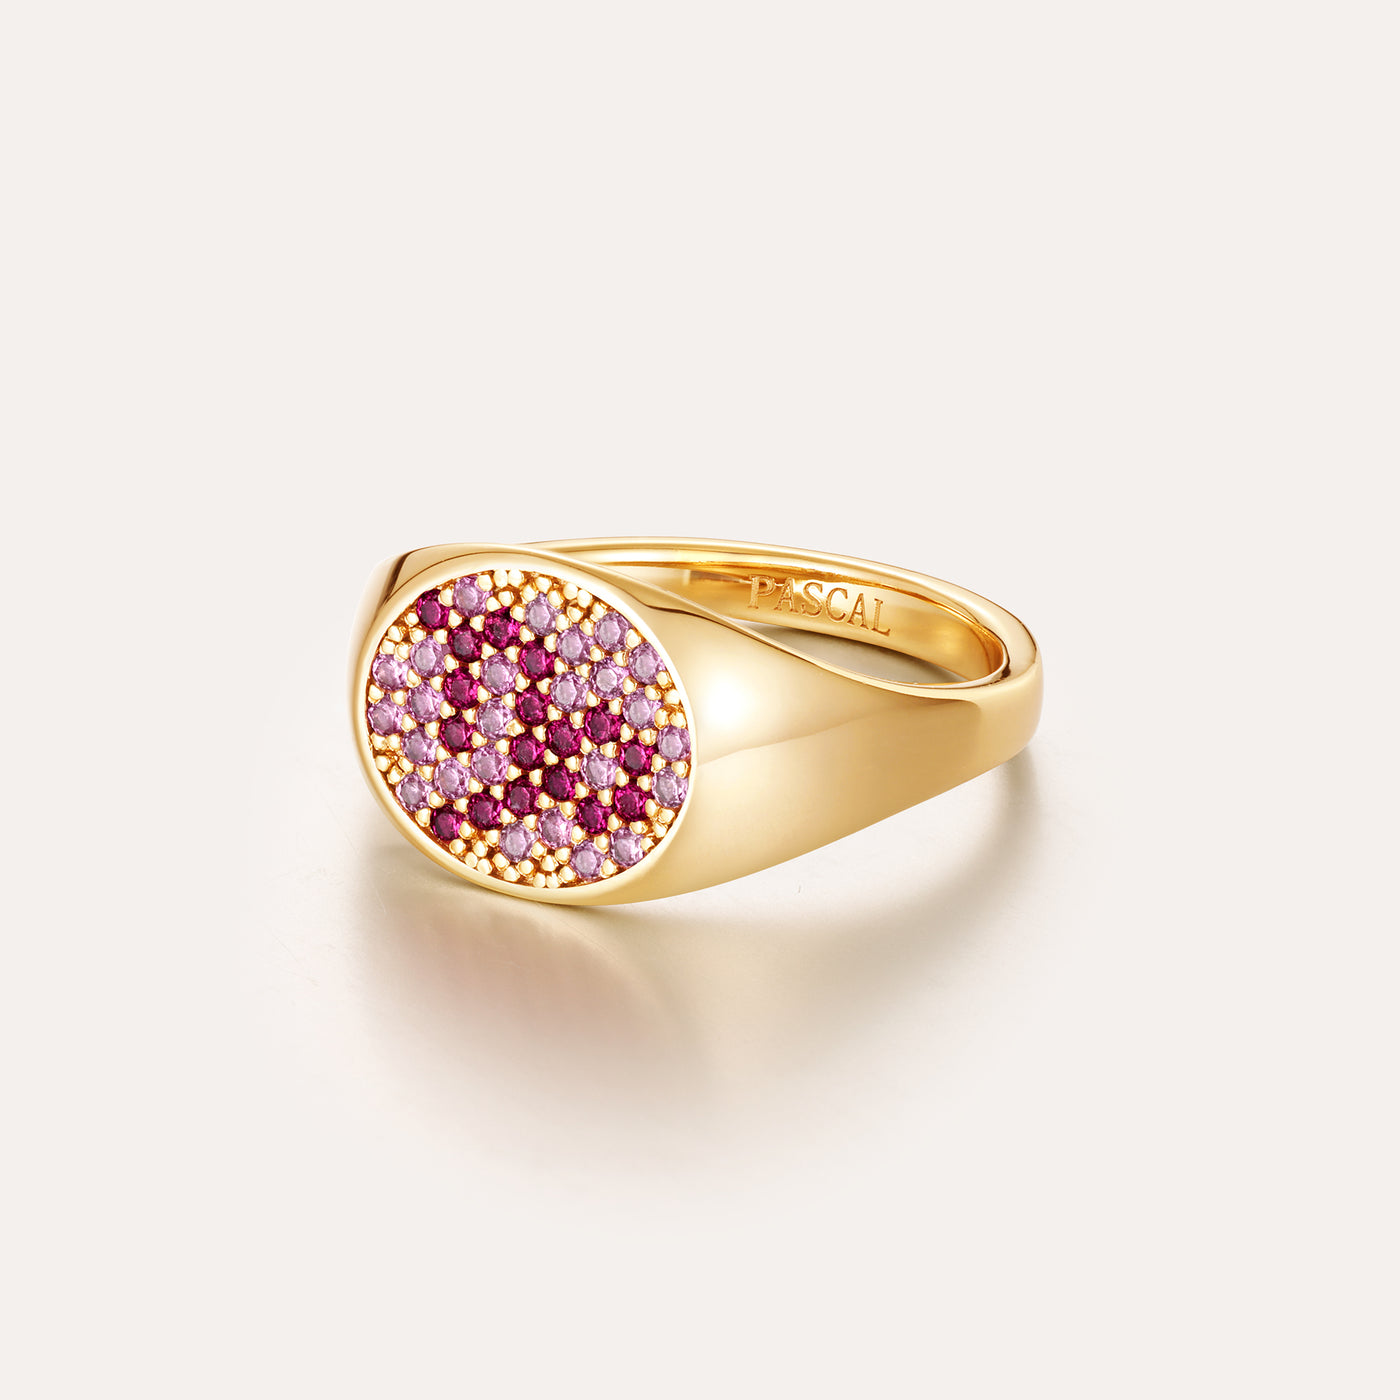 Mélange Cancer Pinky Ring